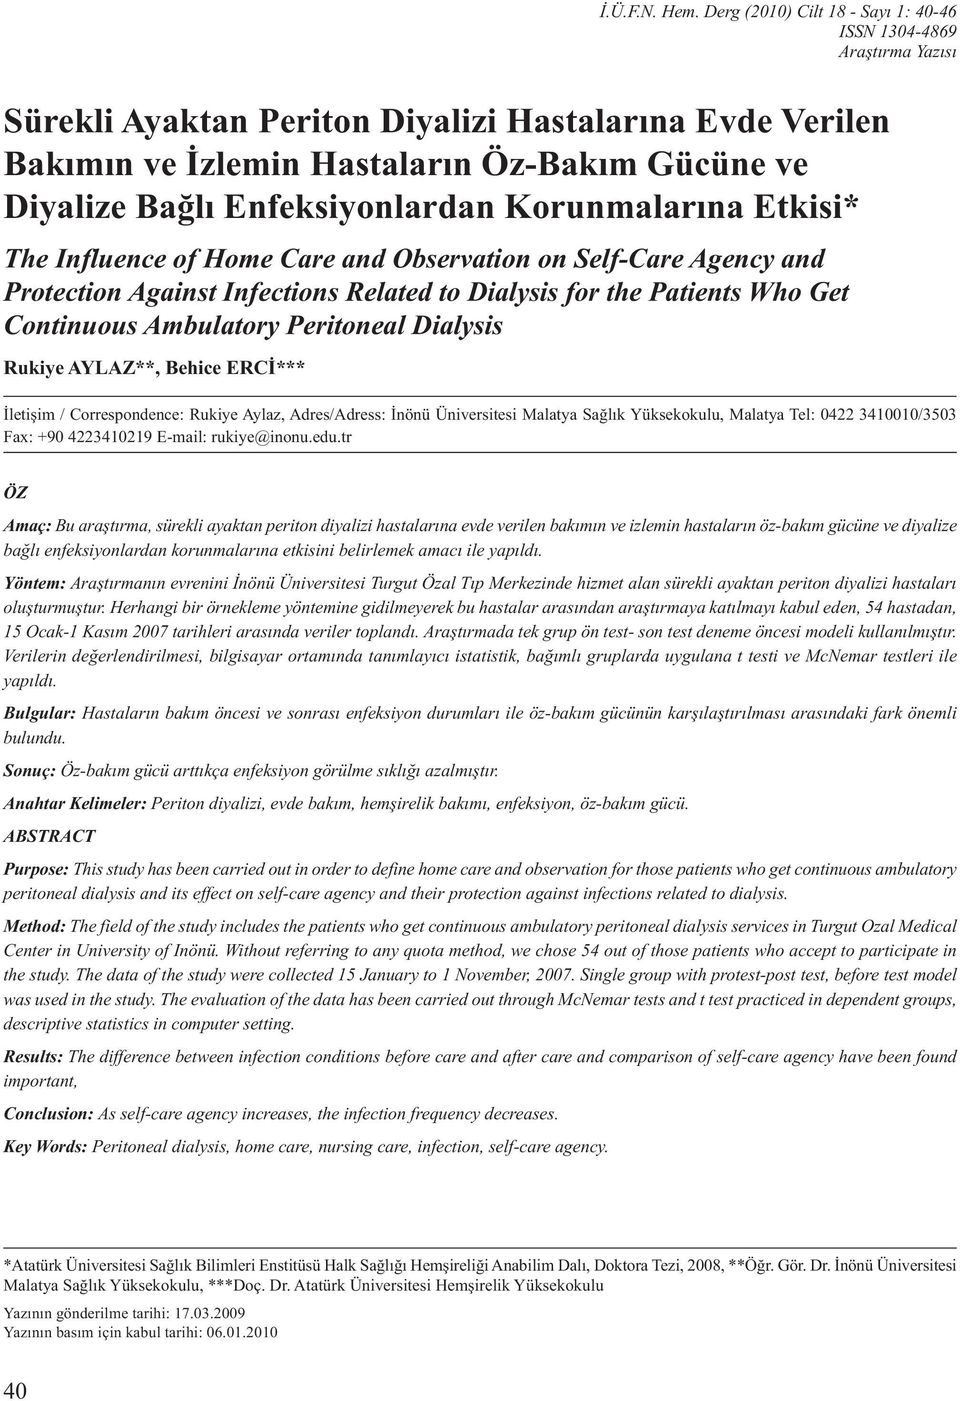 Enfeksiyonlardan Korunmalarına Etkisi* The Influence of Home Care and Observation on Self-Care Agency and Protection Against Infections Related to Dialysis for the Patients Who Get Continuous